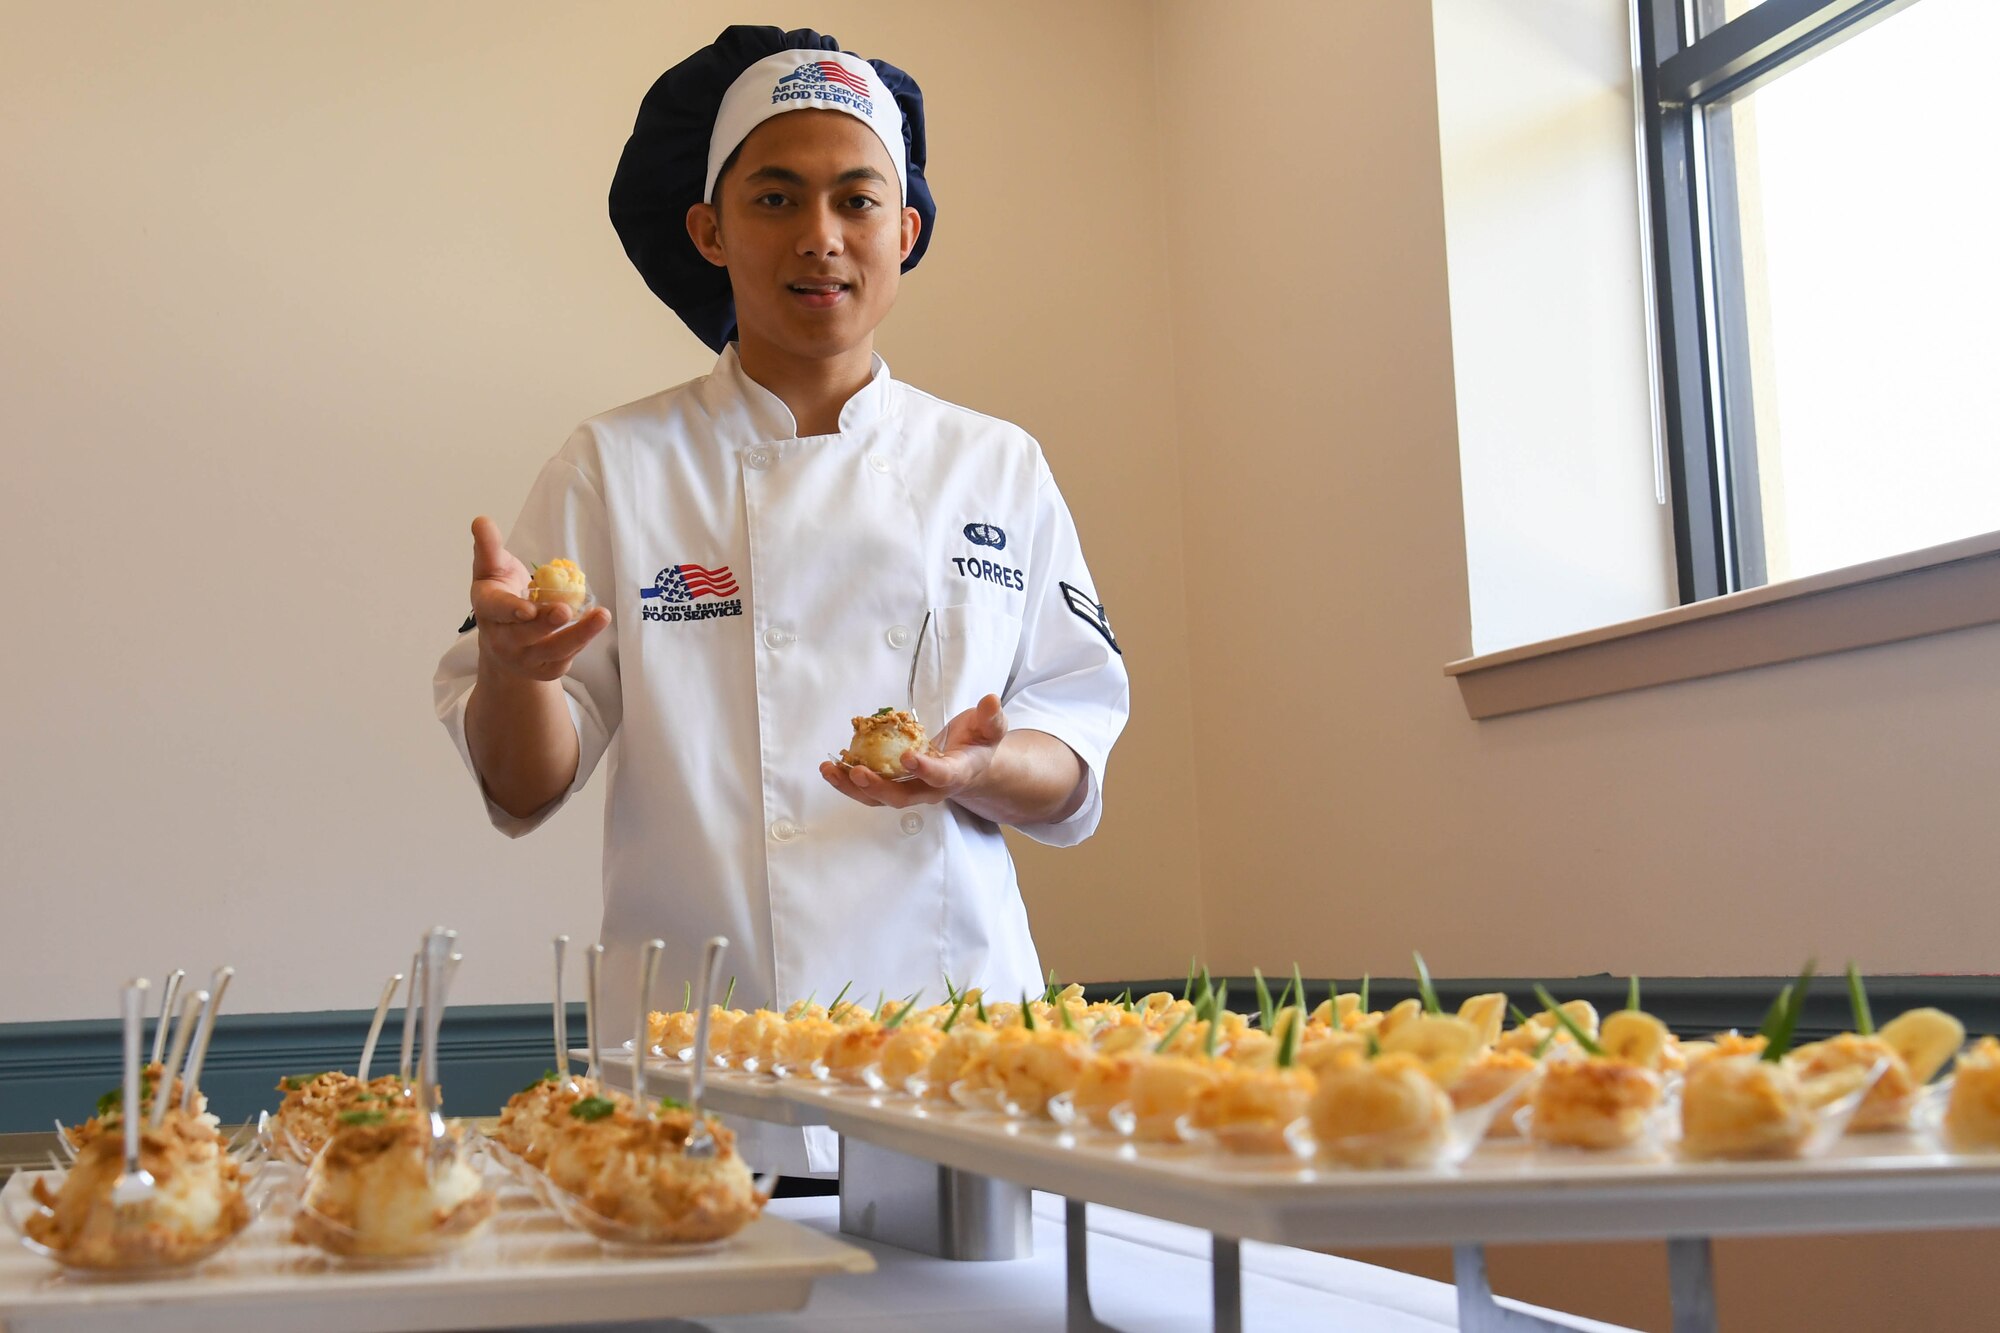 Airman 1st Class Lester Torres, 2nd Force Support Squadron food services apprentice presents his dish during an advanced culinary skills course graduation at the Red River Dining Facility at Barksdale Air Force Base, La., Aug. 18, 2017.Torres’ prepared a cassava cake dessert local to the Philippines.